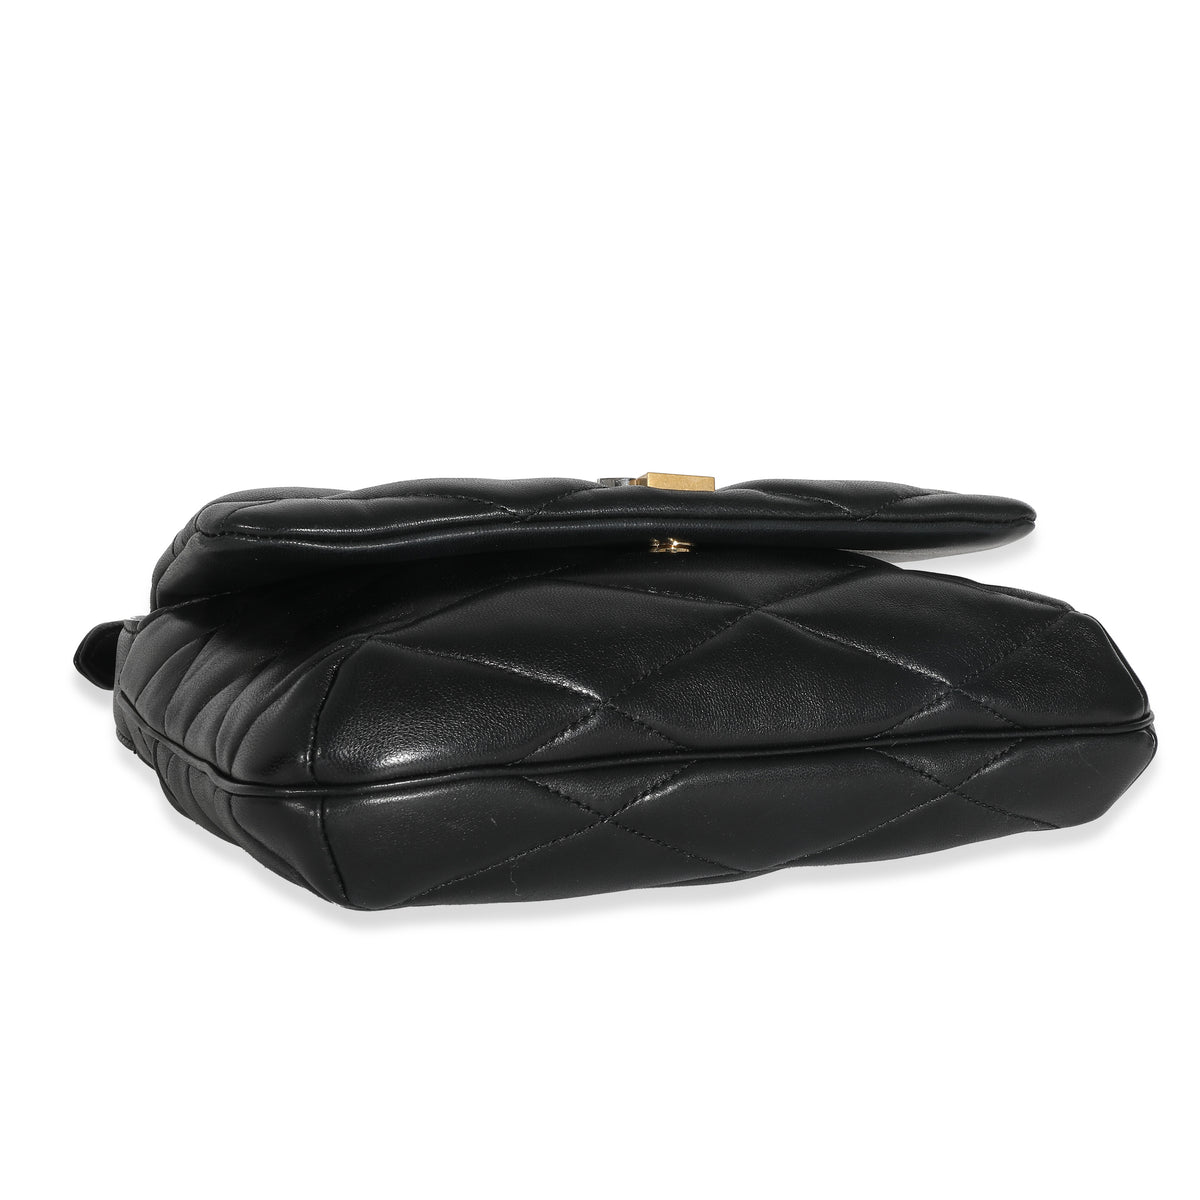 Black Quilted Lambskin Le 57 Hobo